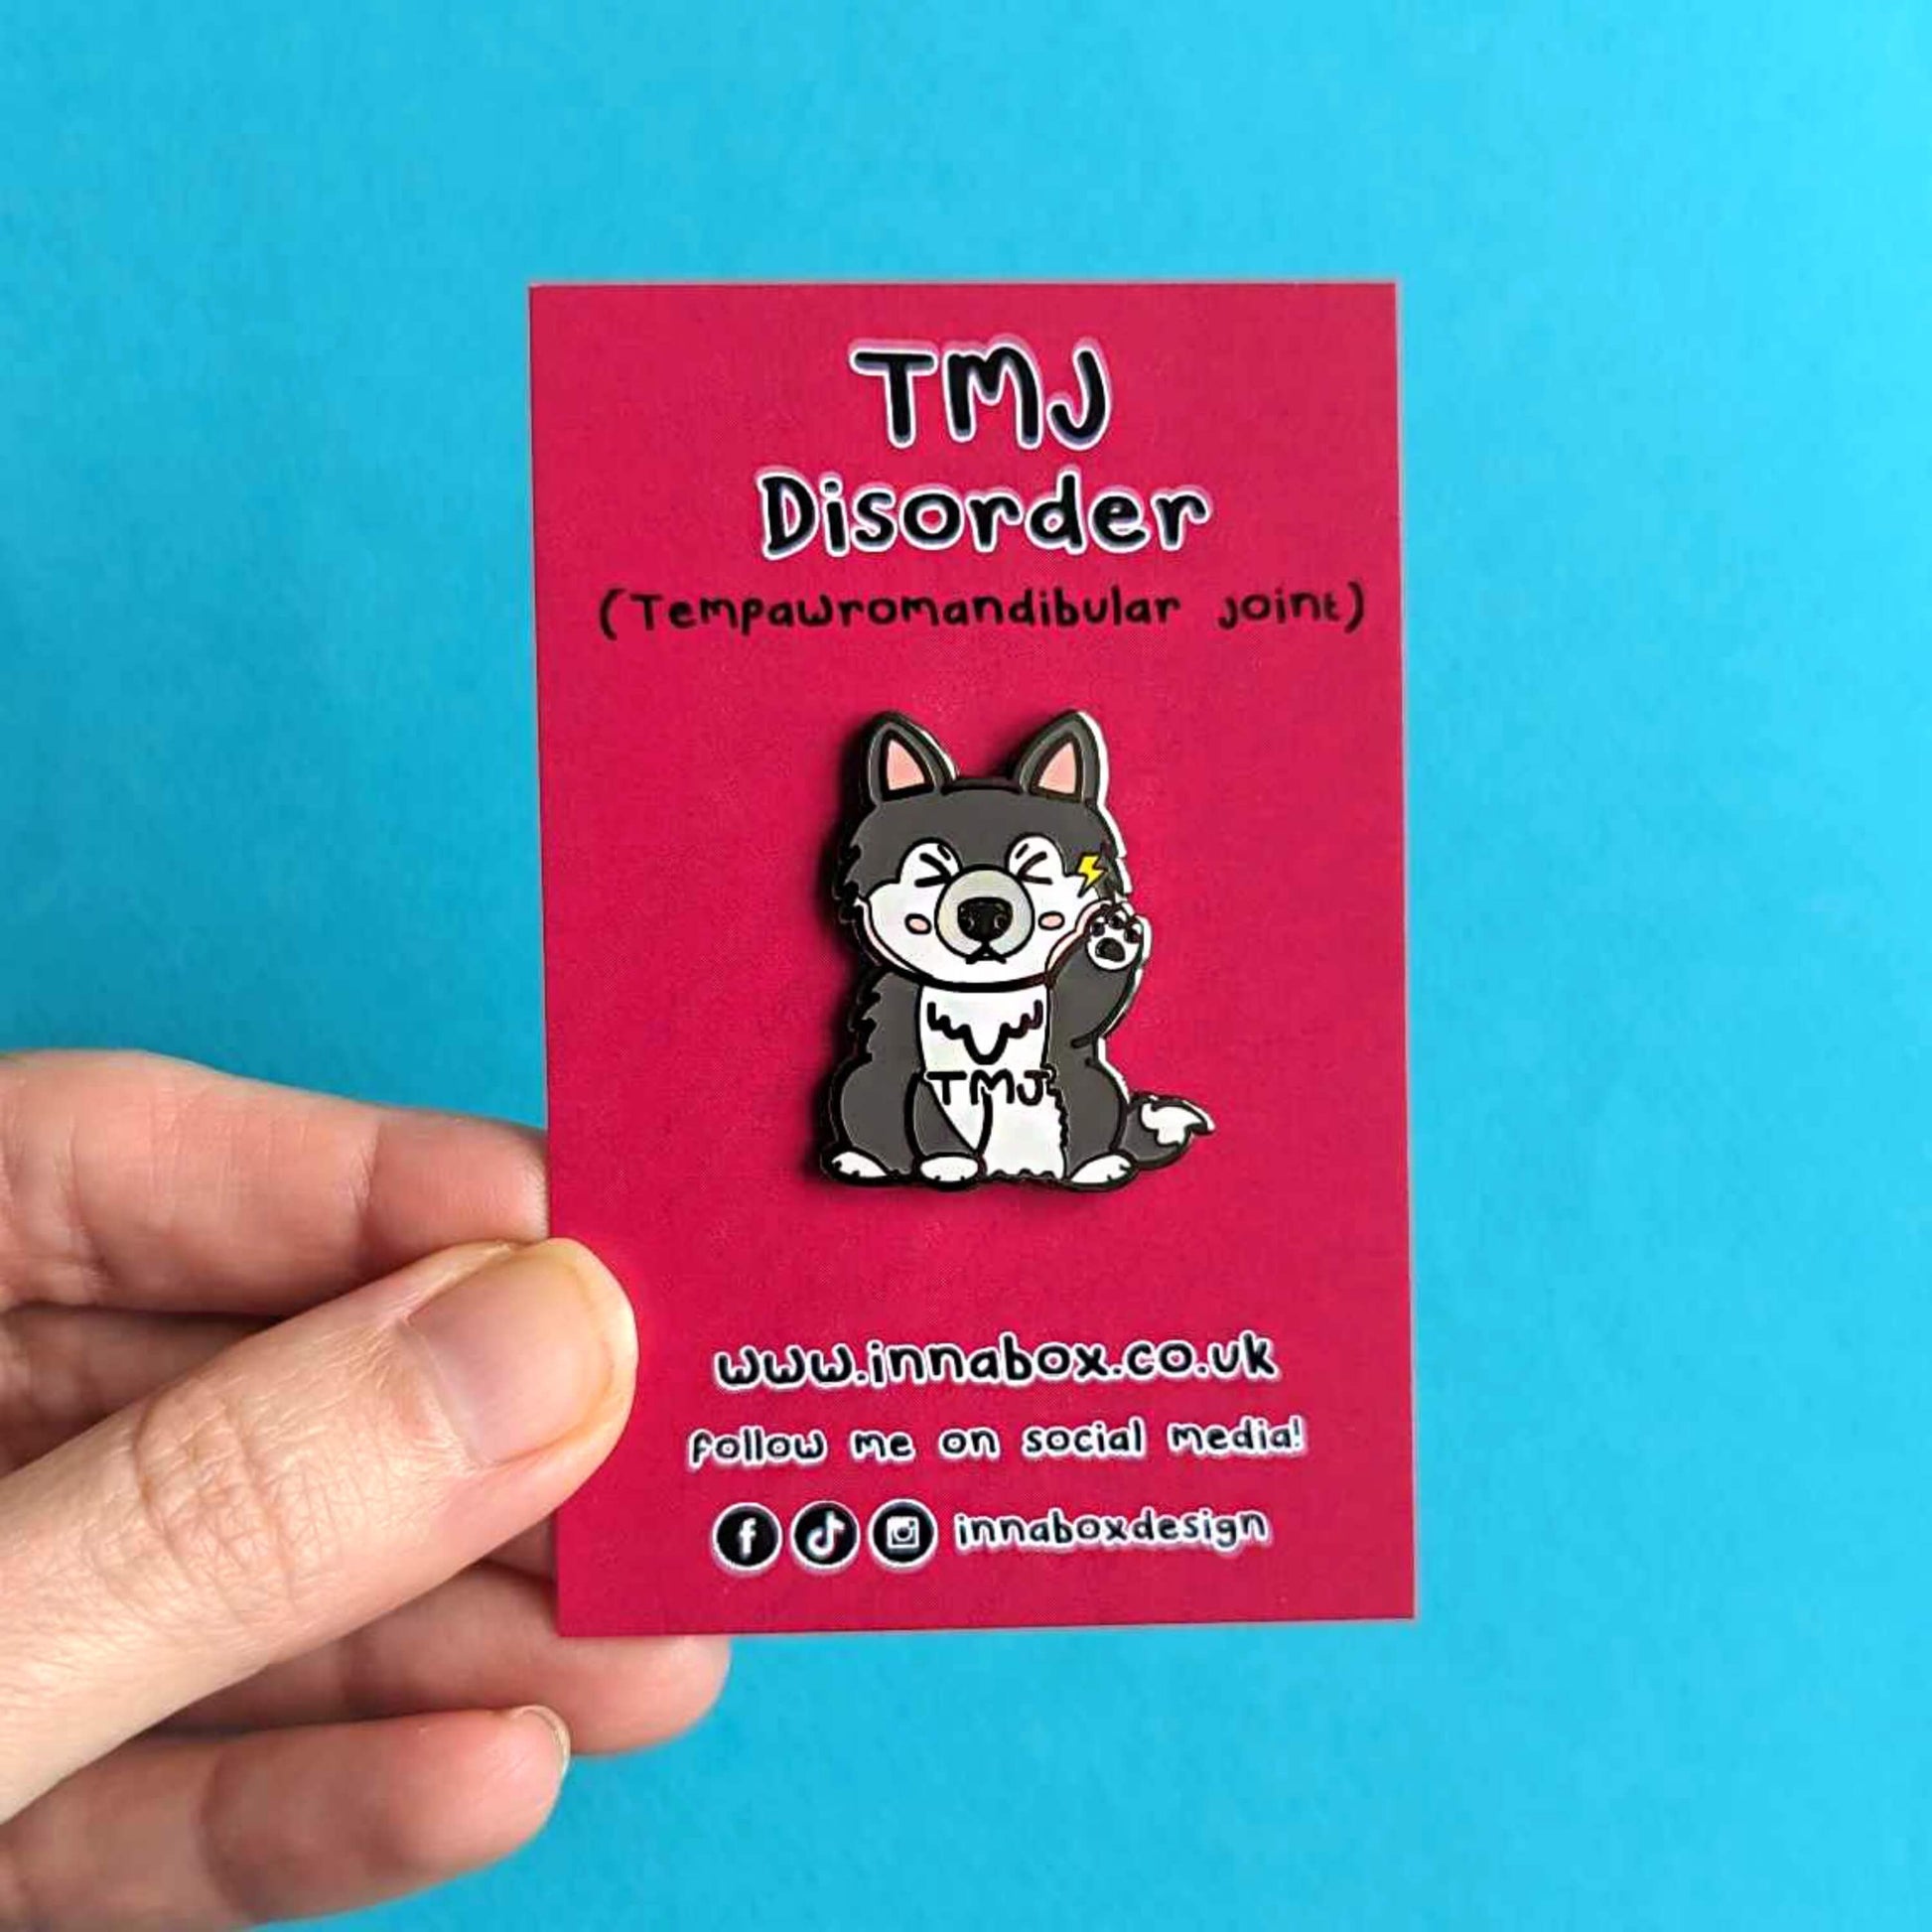 The Tempawromandibular Disorder Dog Enamel Pin - Temporomandibular Disorder TMJ on red backing card being held over a blue background. The grey husky dog shaped enamel pin has a pained face with shut eyes, one paw up by its jaw with a yellow lightning bolt and black text across its chest reading 'TMJ'. The hand drawn design is raising awareness for Temporomandibular Disorder TMJ.